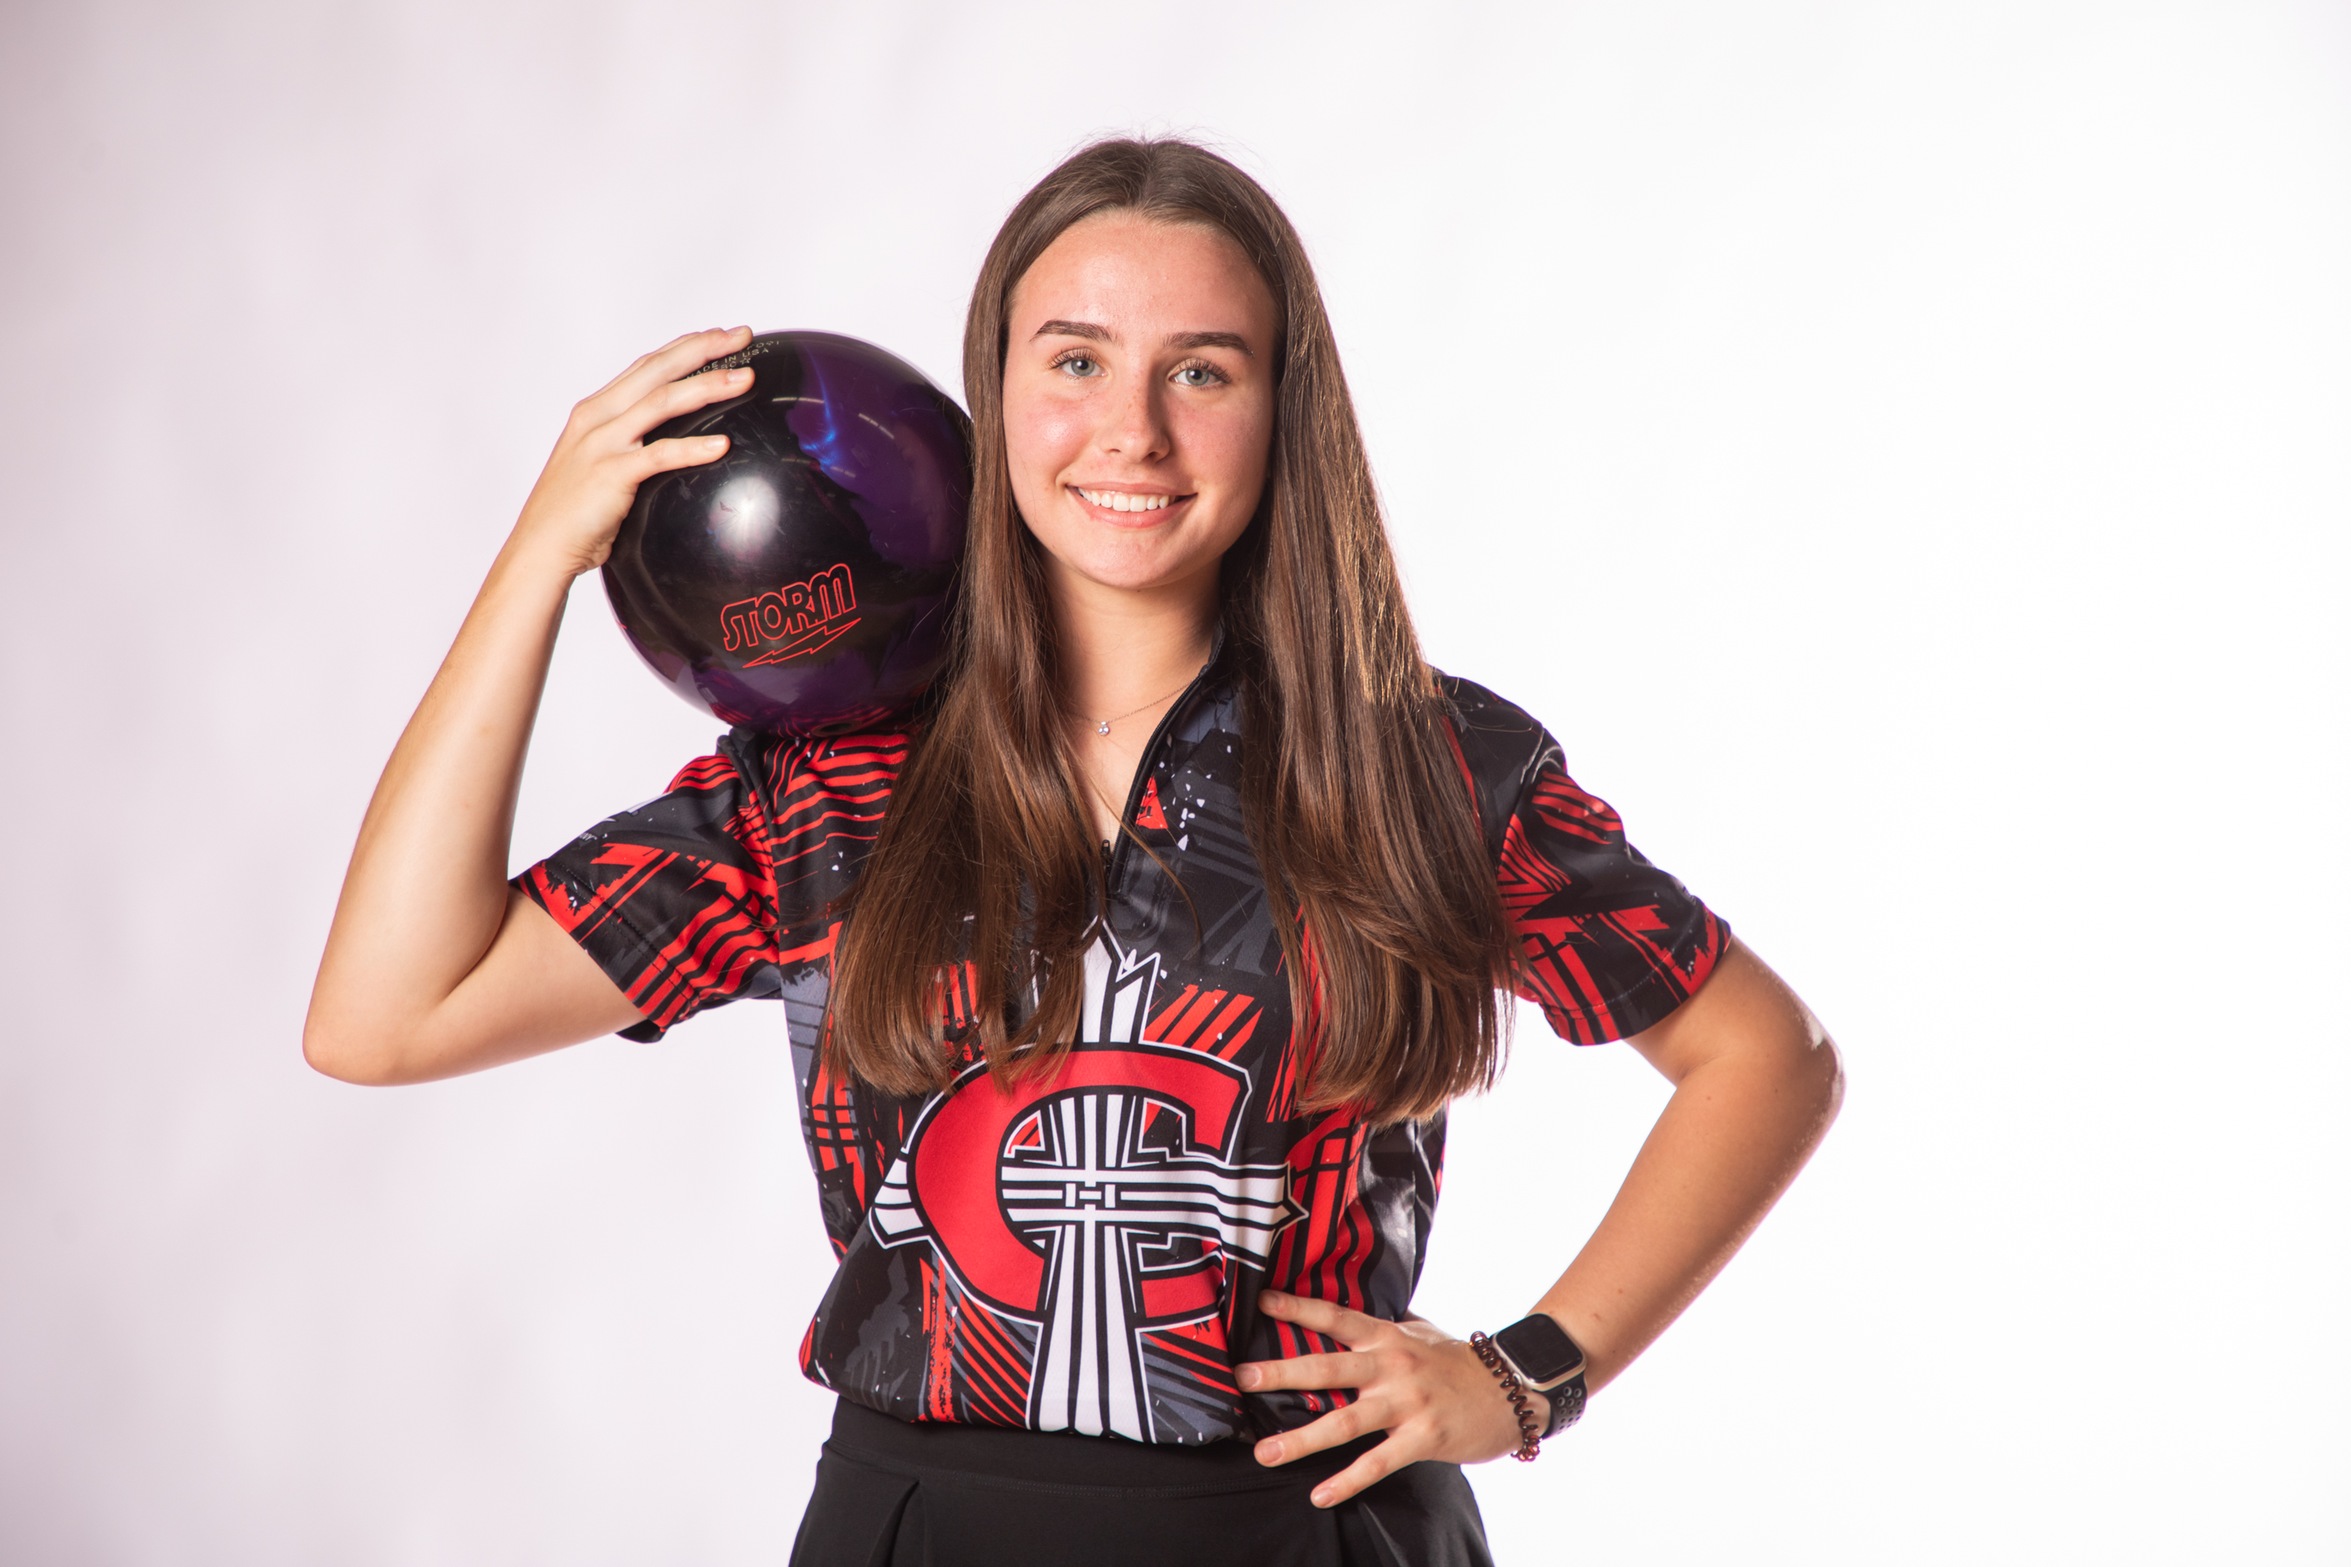 Women's Bowling places 8th at the C300 Western Shootout